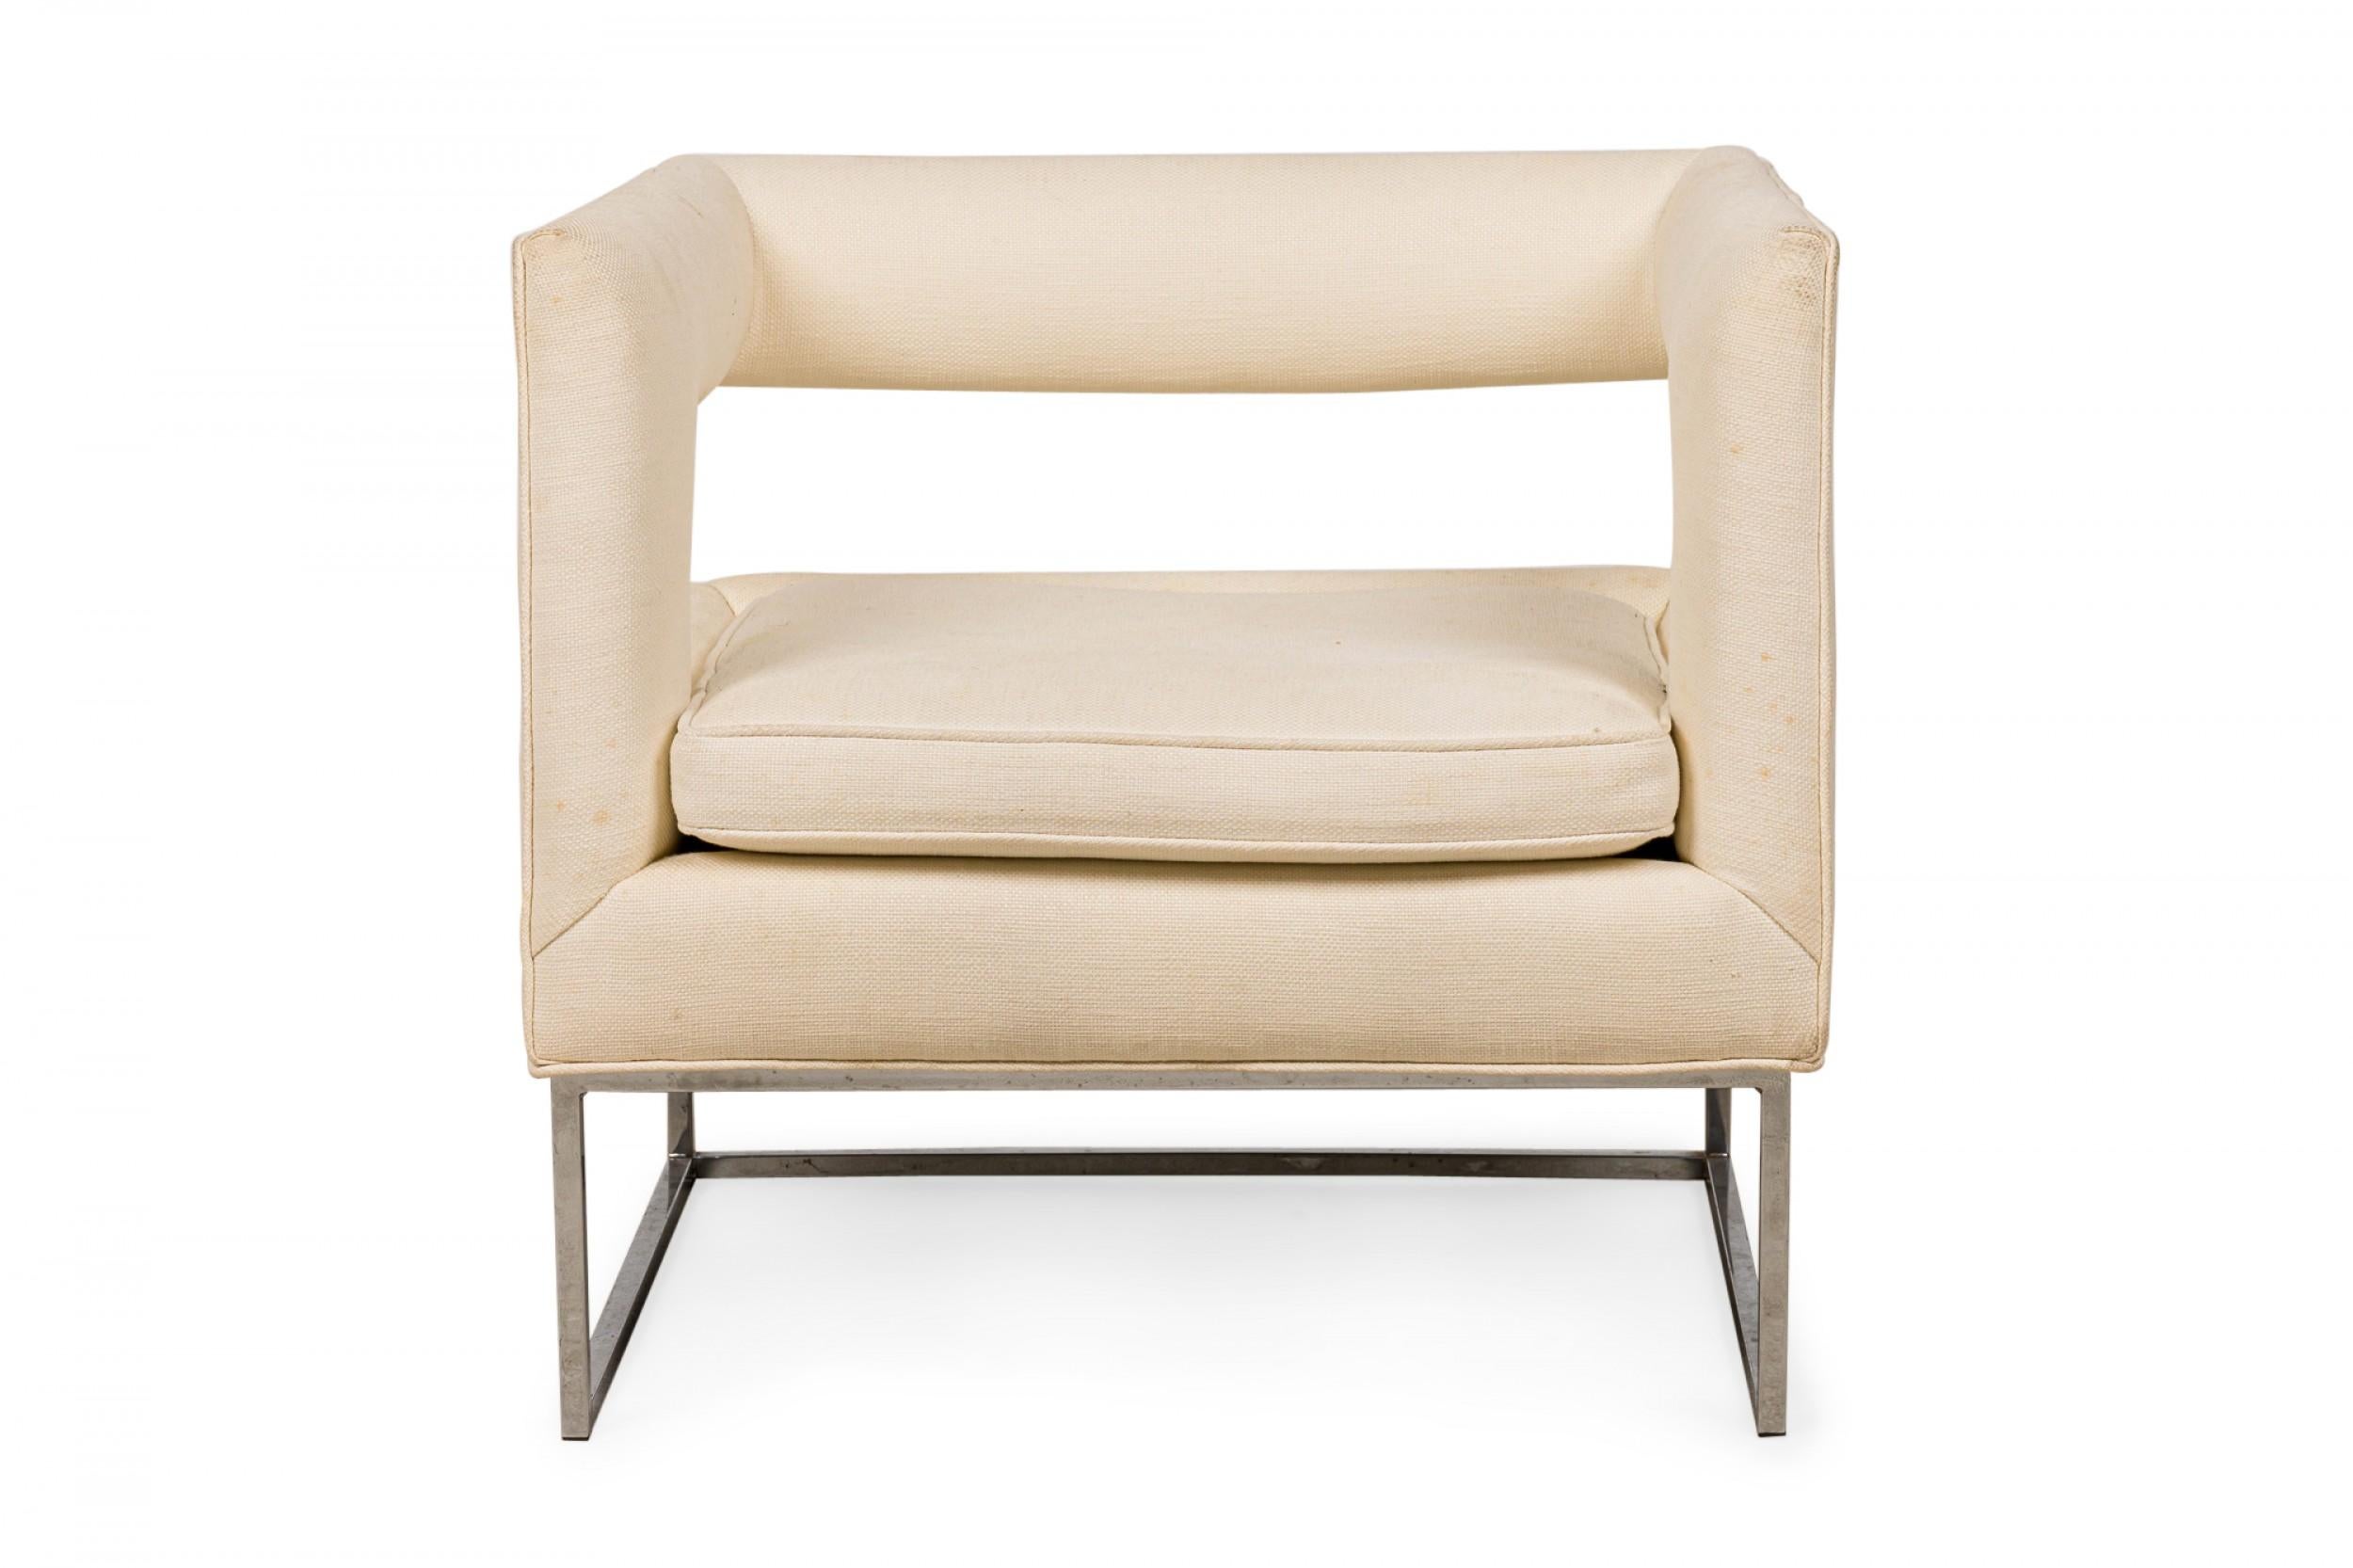 American Contemporary cube form lounge / armchair with an open back and beige fabric upholstery, resting on a square chrome tube base. (FLAIR)